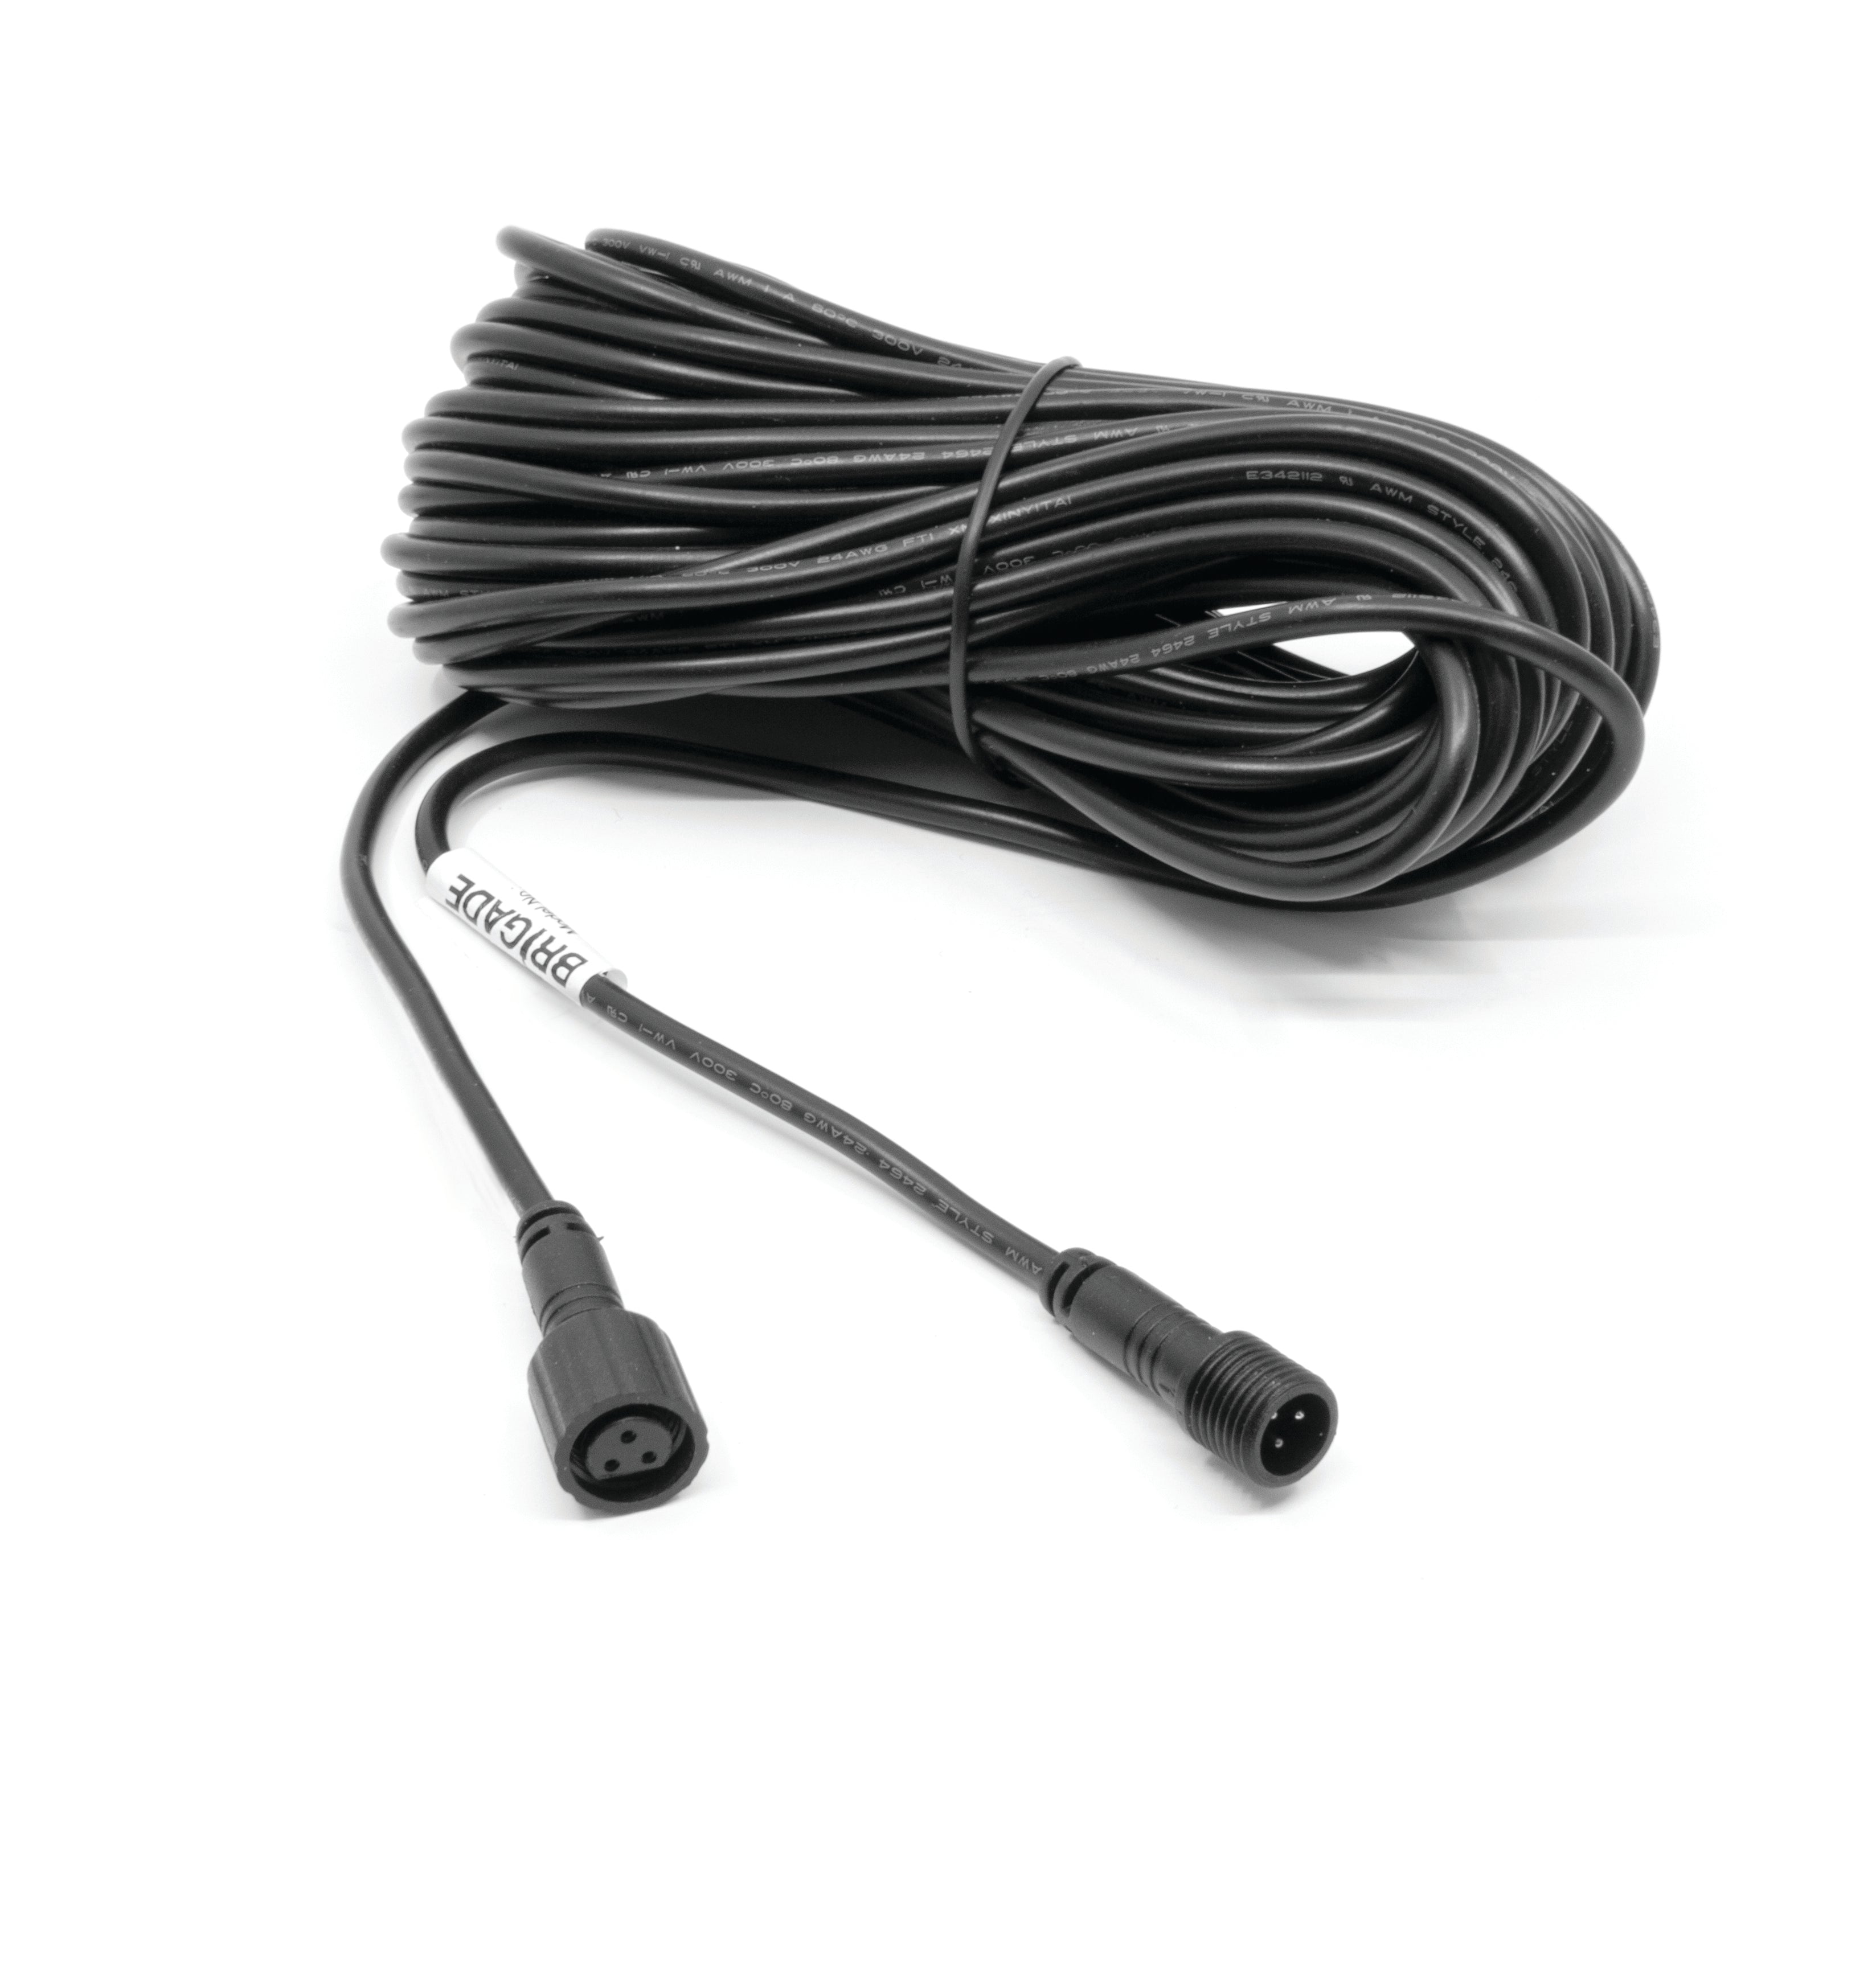 Buzzer/Display extension cable 15 Metre for Ultrasonic detection systems